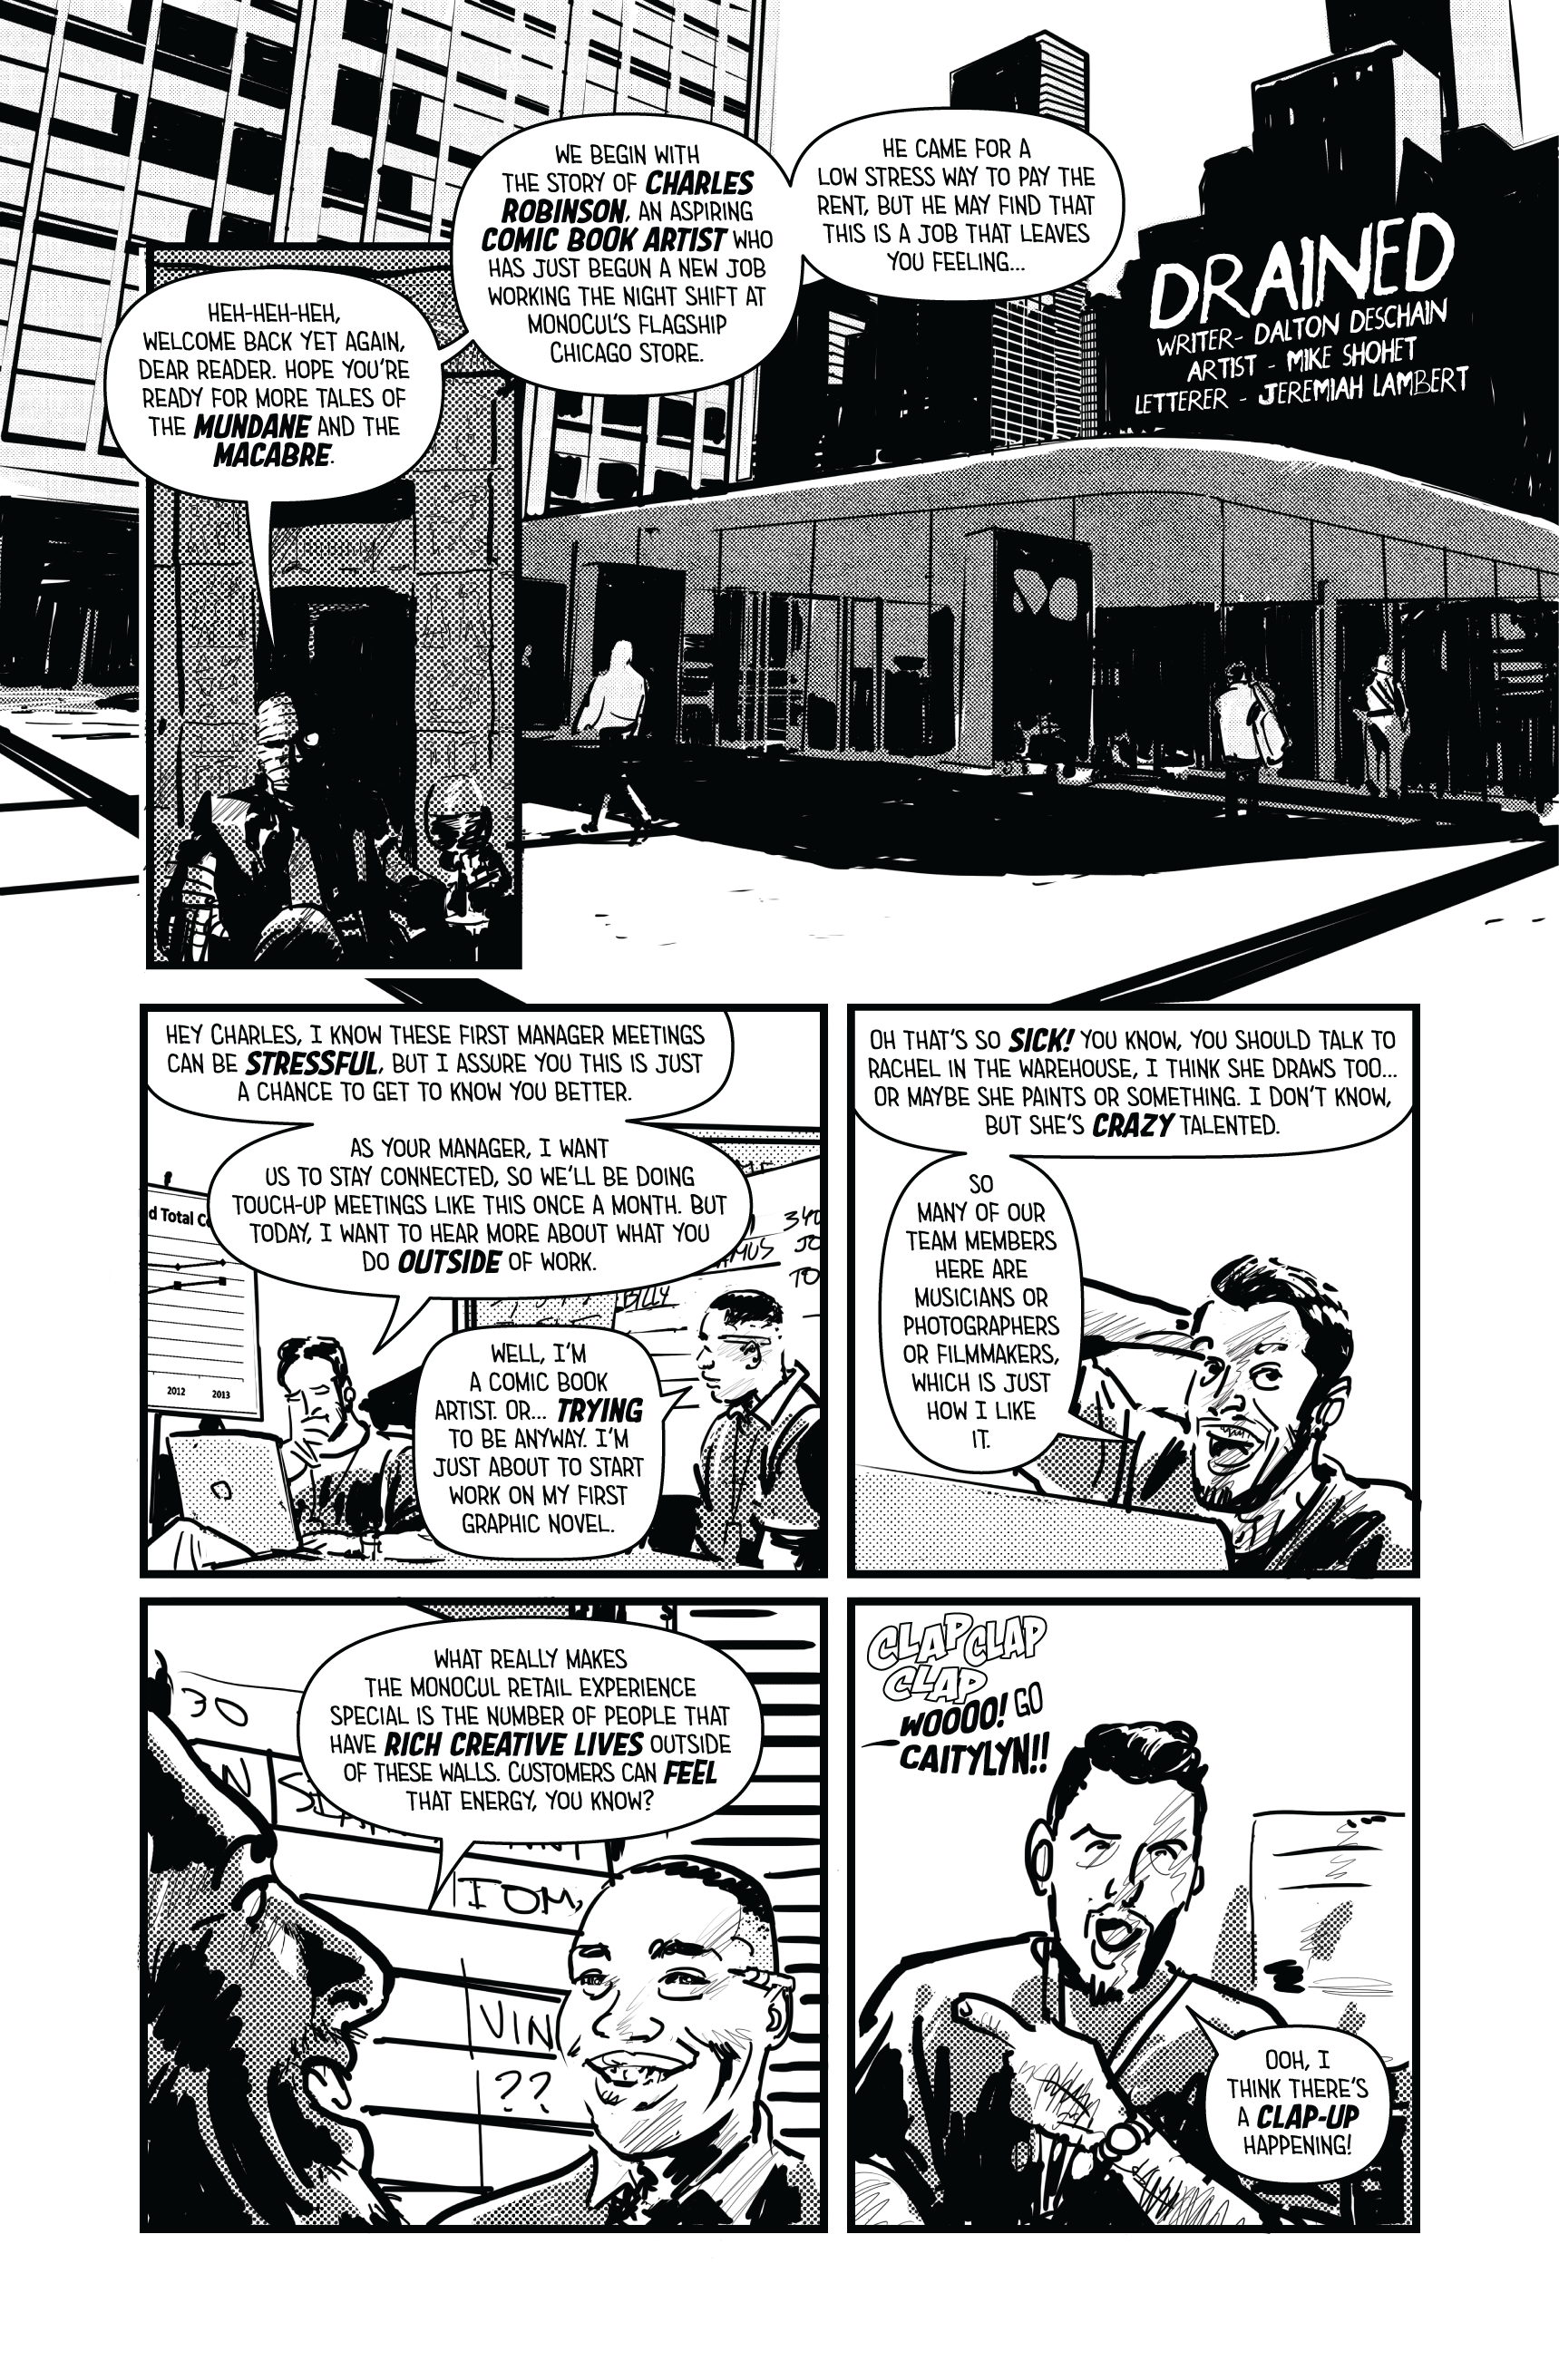 Monocul issue 04 story 01 pg 01-01.png